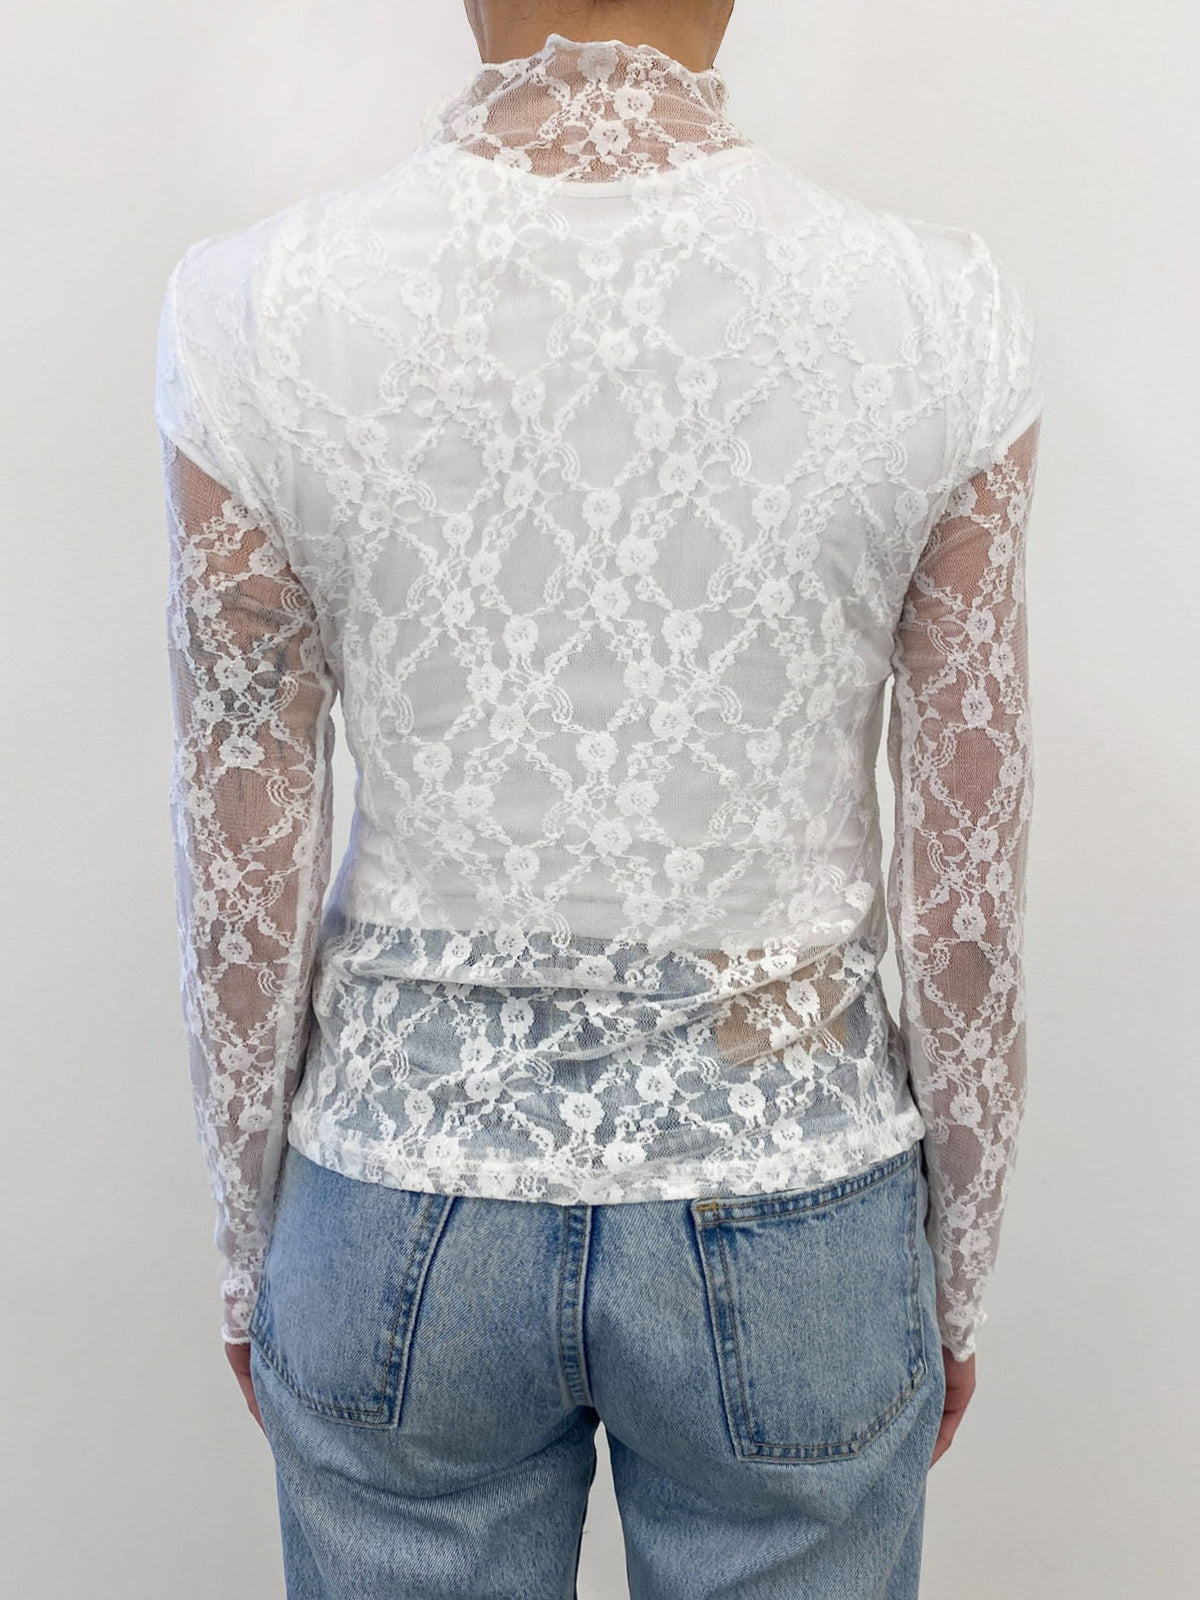 Zutter White Floral Lace Top